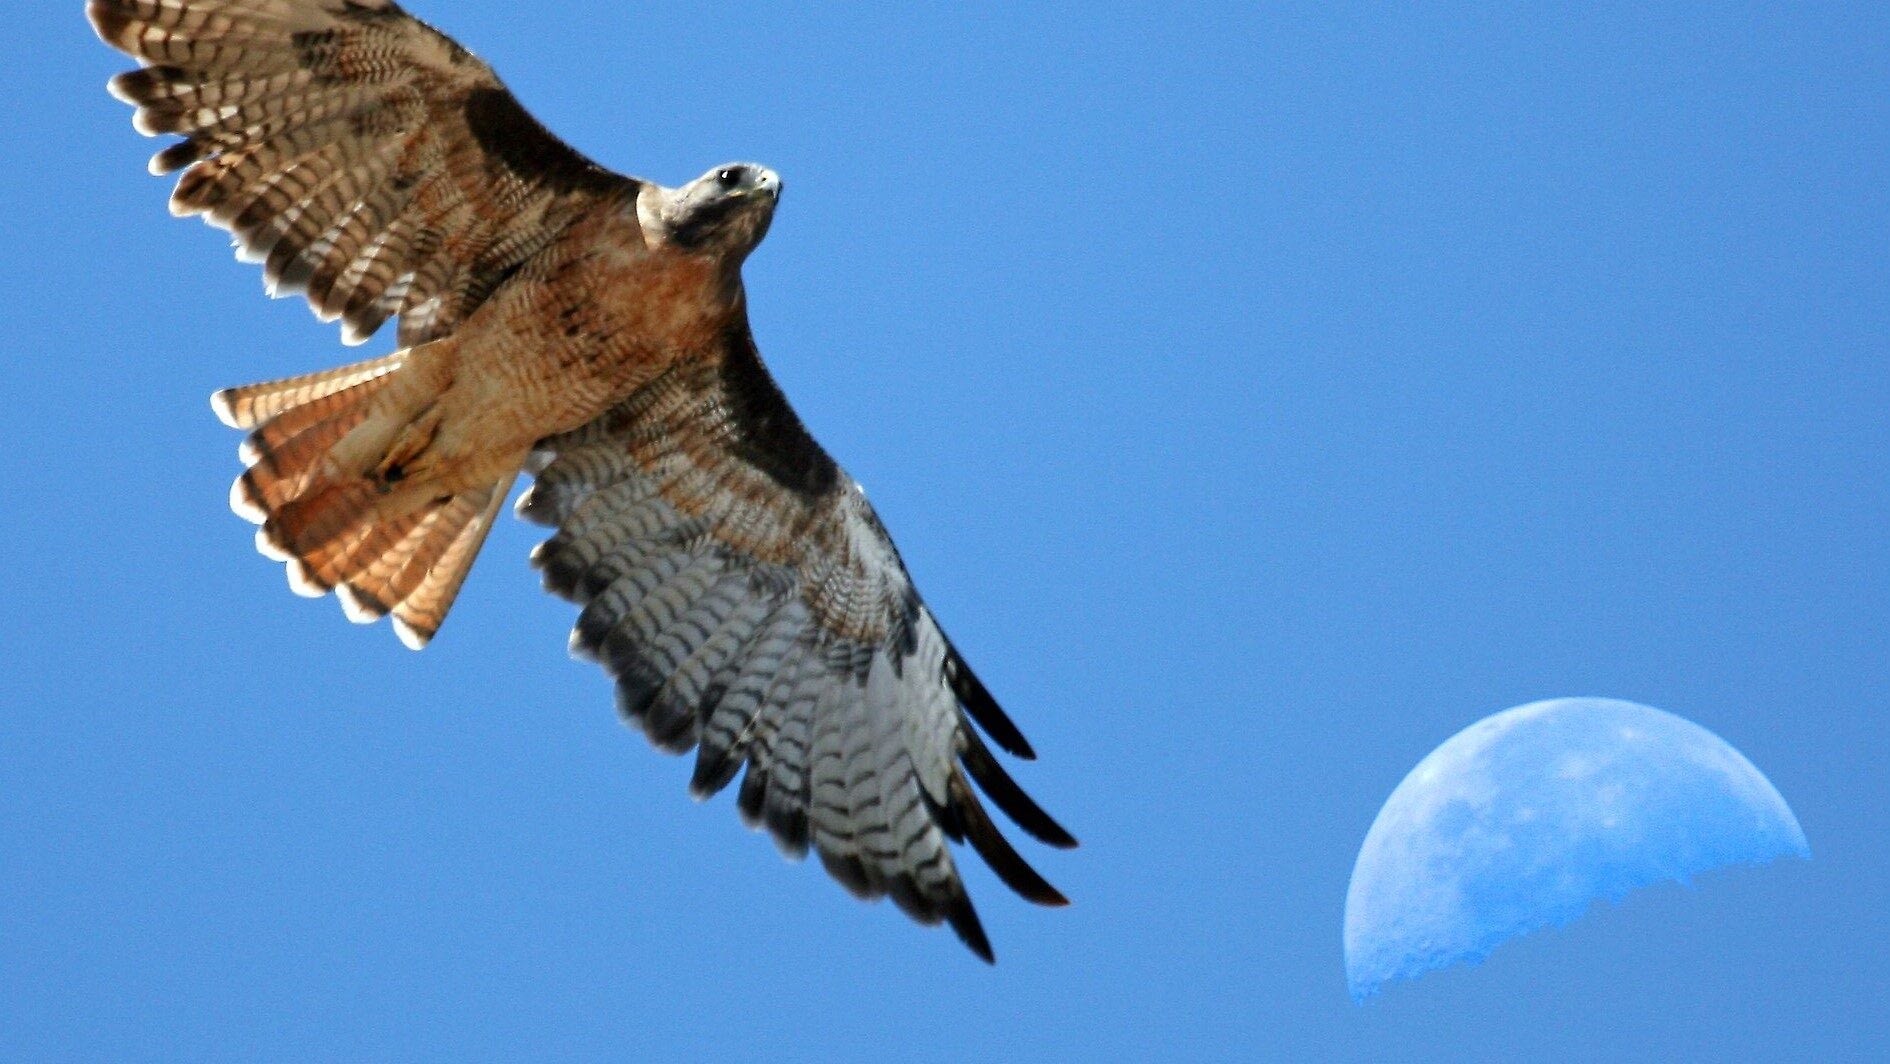 Image: A red tailed hawk flies with the moon in the background